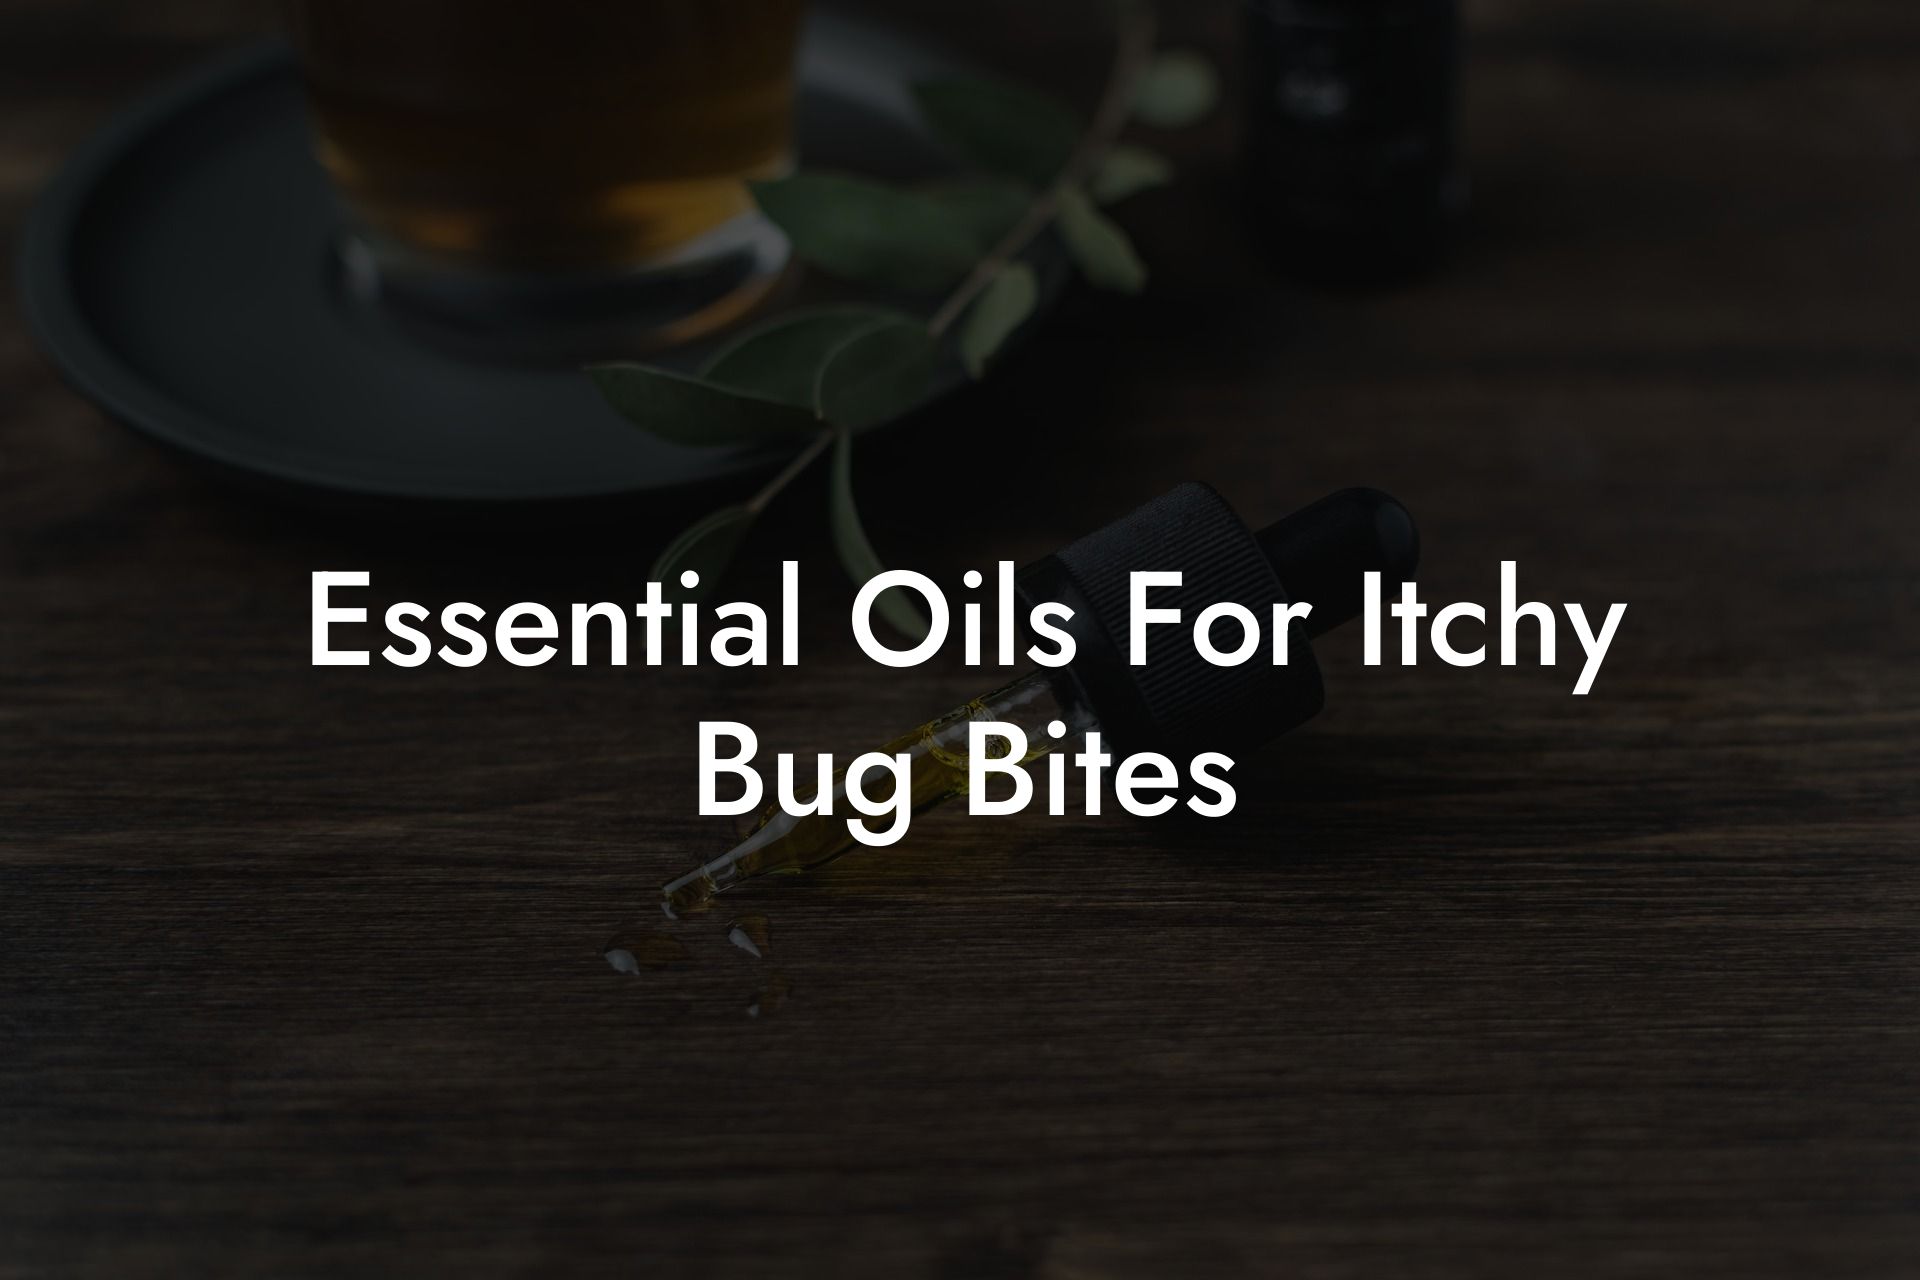 Essential Oils For Itchy Bug Bites